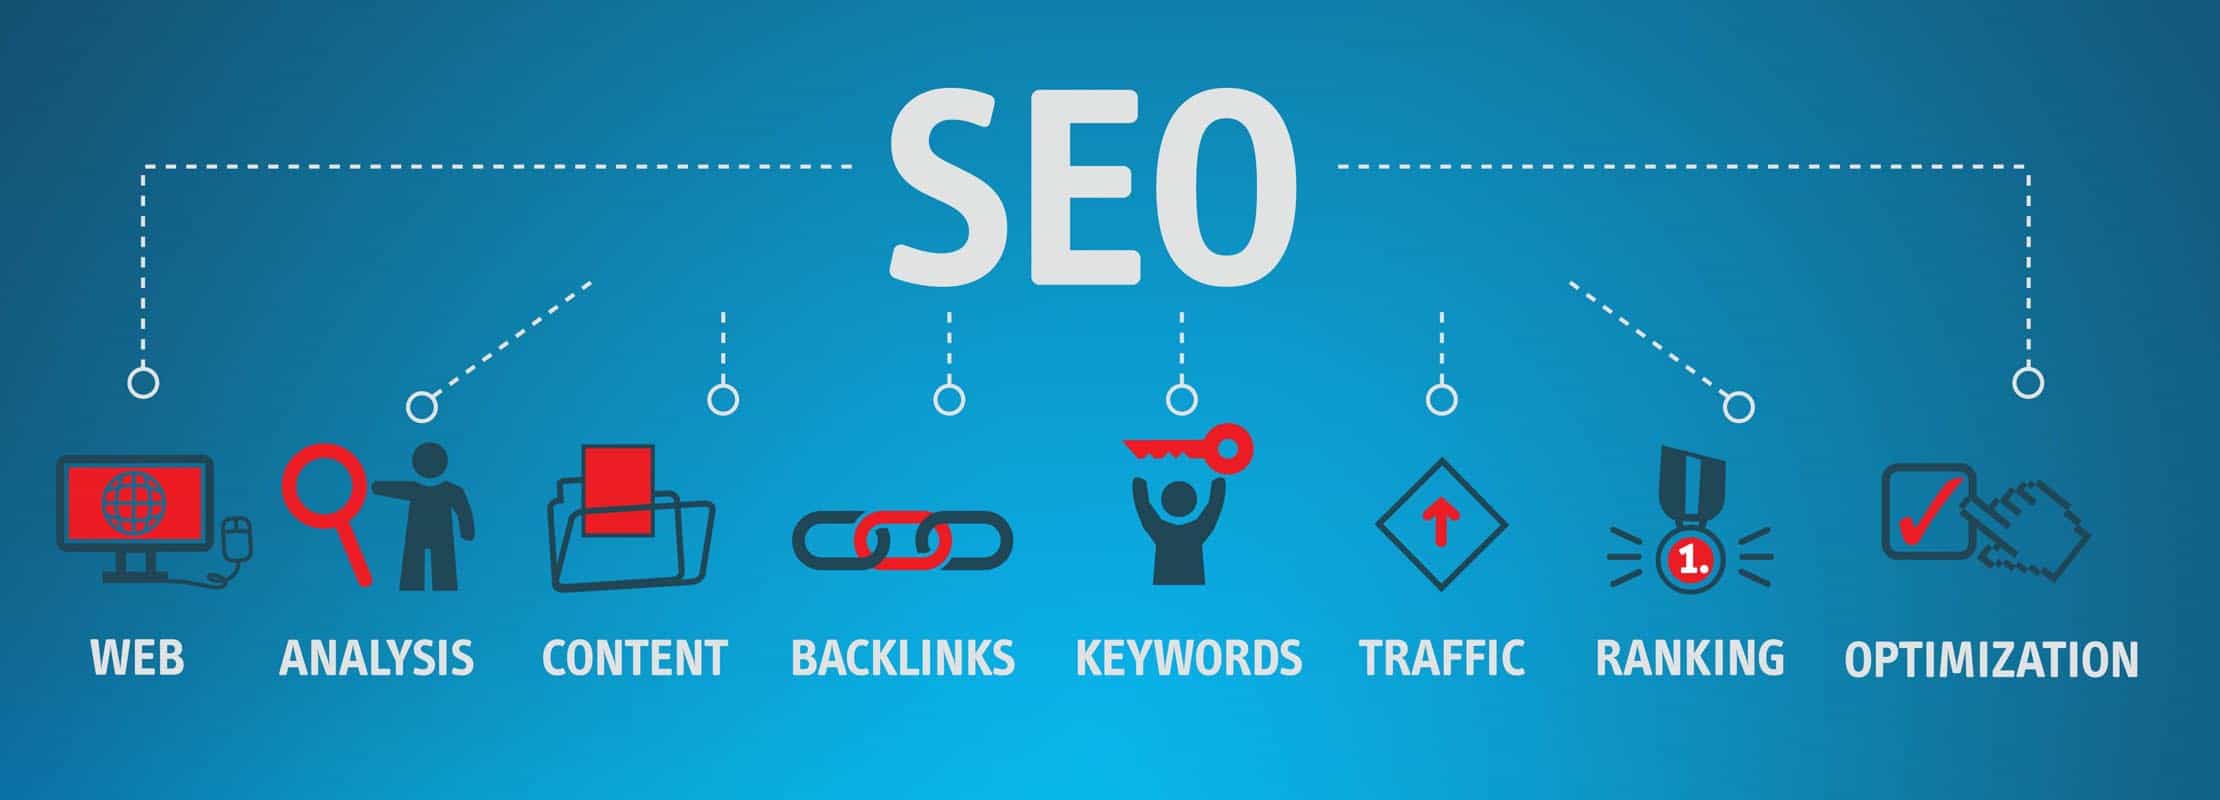 web,analysis,content,blacklinks,keywords,traffic,ranking,optimization all this pointed to SEO|web design company in kerala